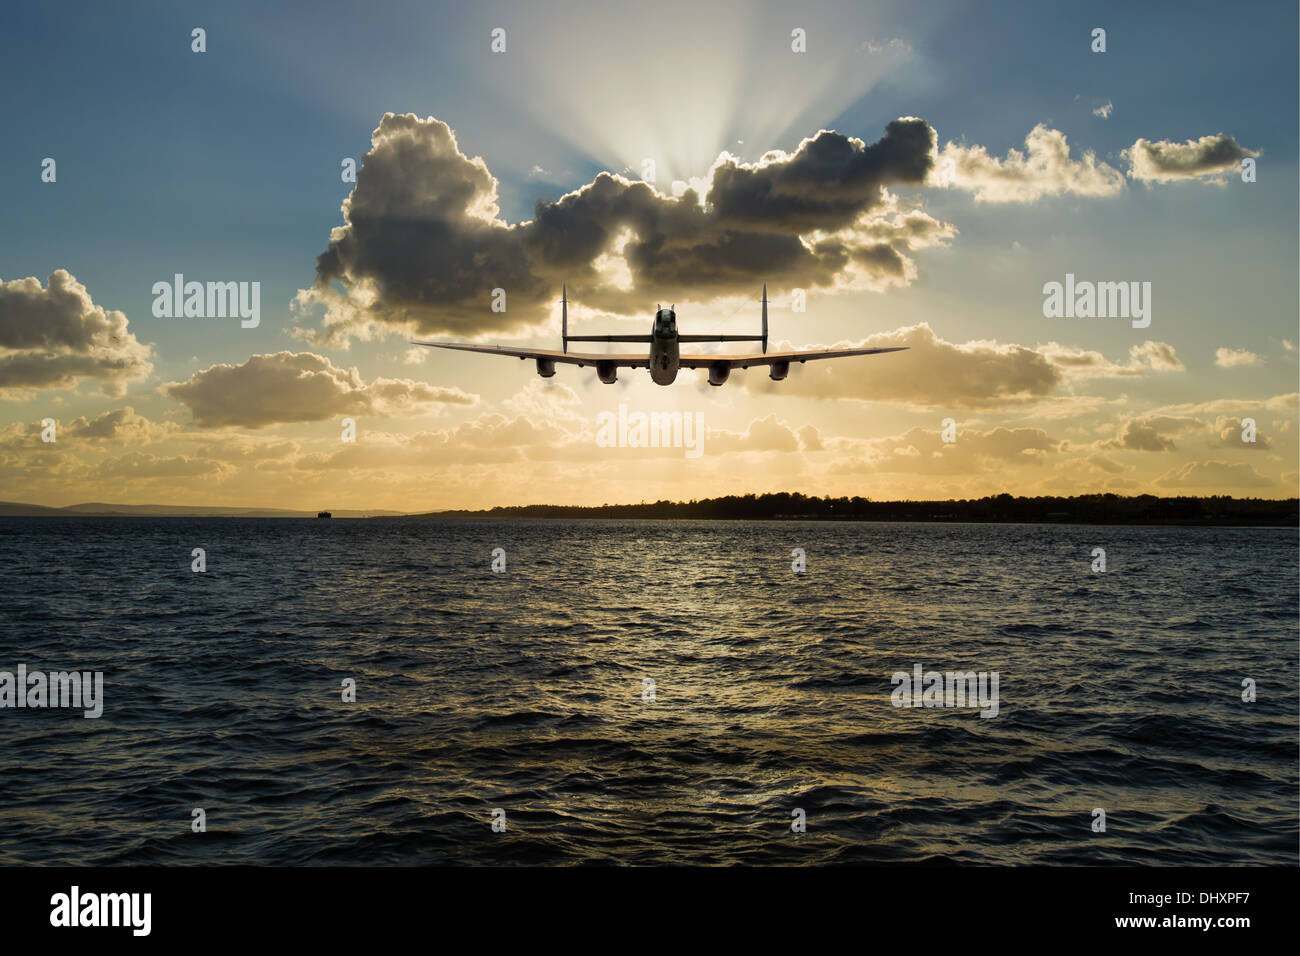 Avro Lancaster bomber in silhouette, heading into the sunset at low level over a coastal seascape. Stock Photo